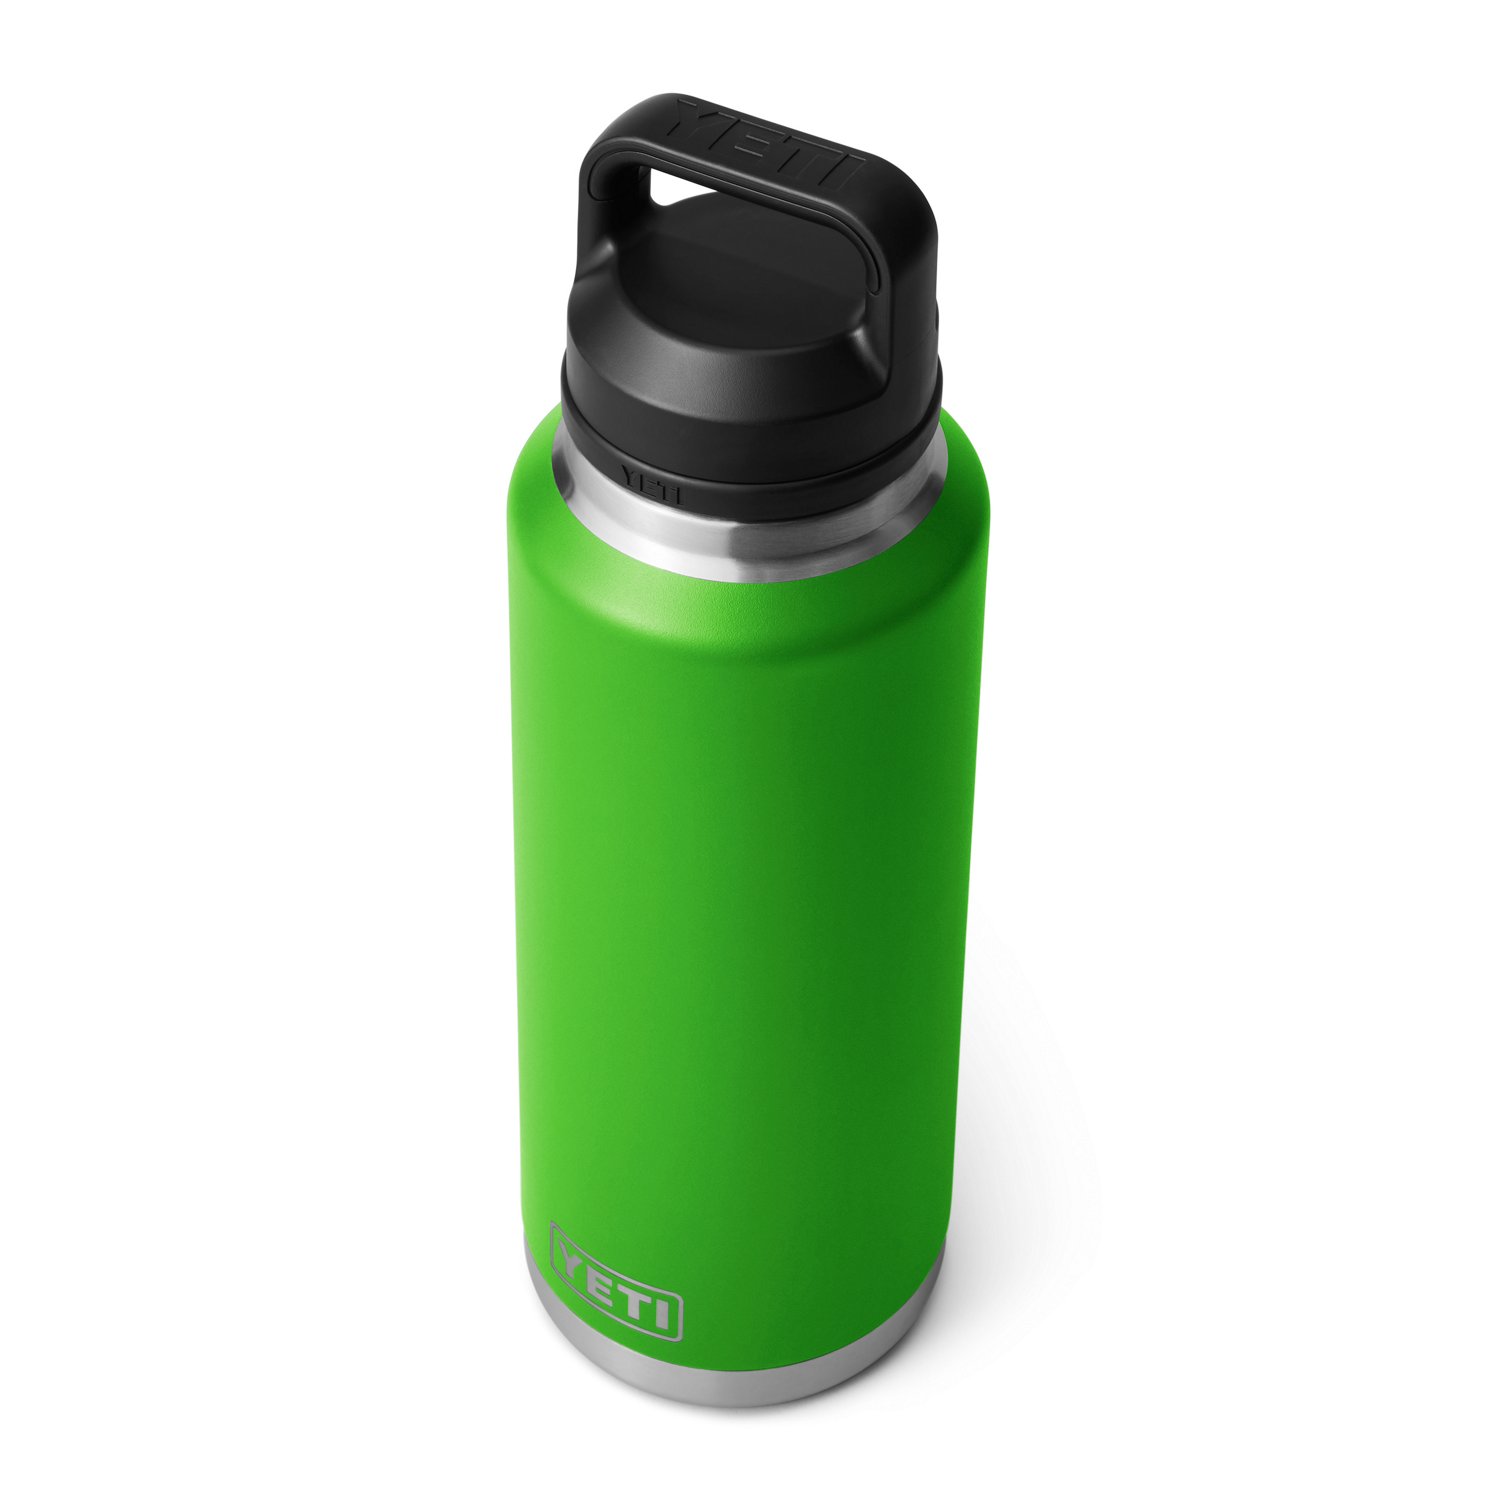 https://academy.scene7.com/is/image/academy//drinkware/yeti-rambler-46-oz-bottle-with-chug-cap-21071501450-green/5bbbf3c20df547c498278bb8e6ffdc67?$pdp-mobile-gallery-ng$